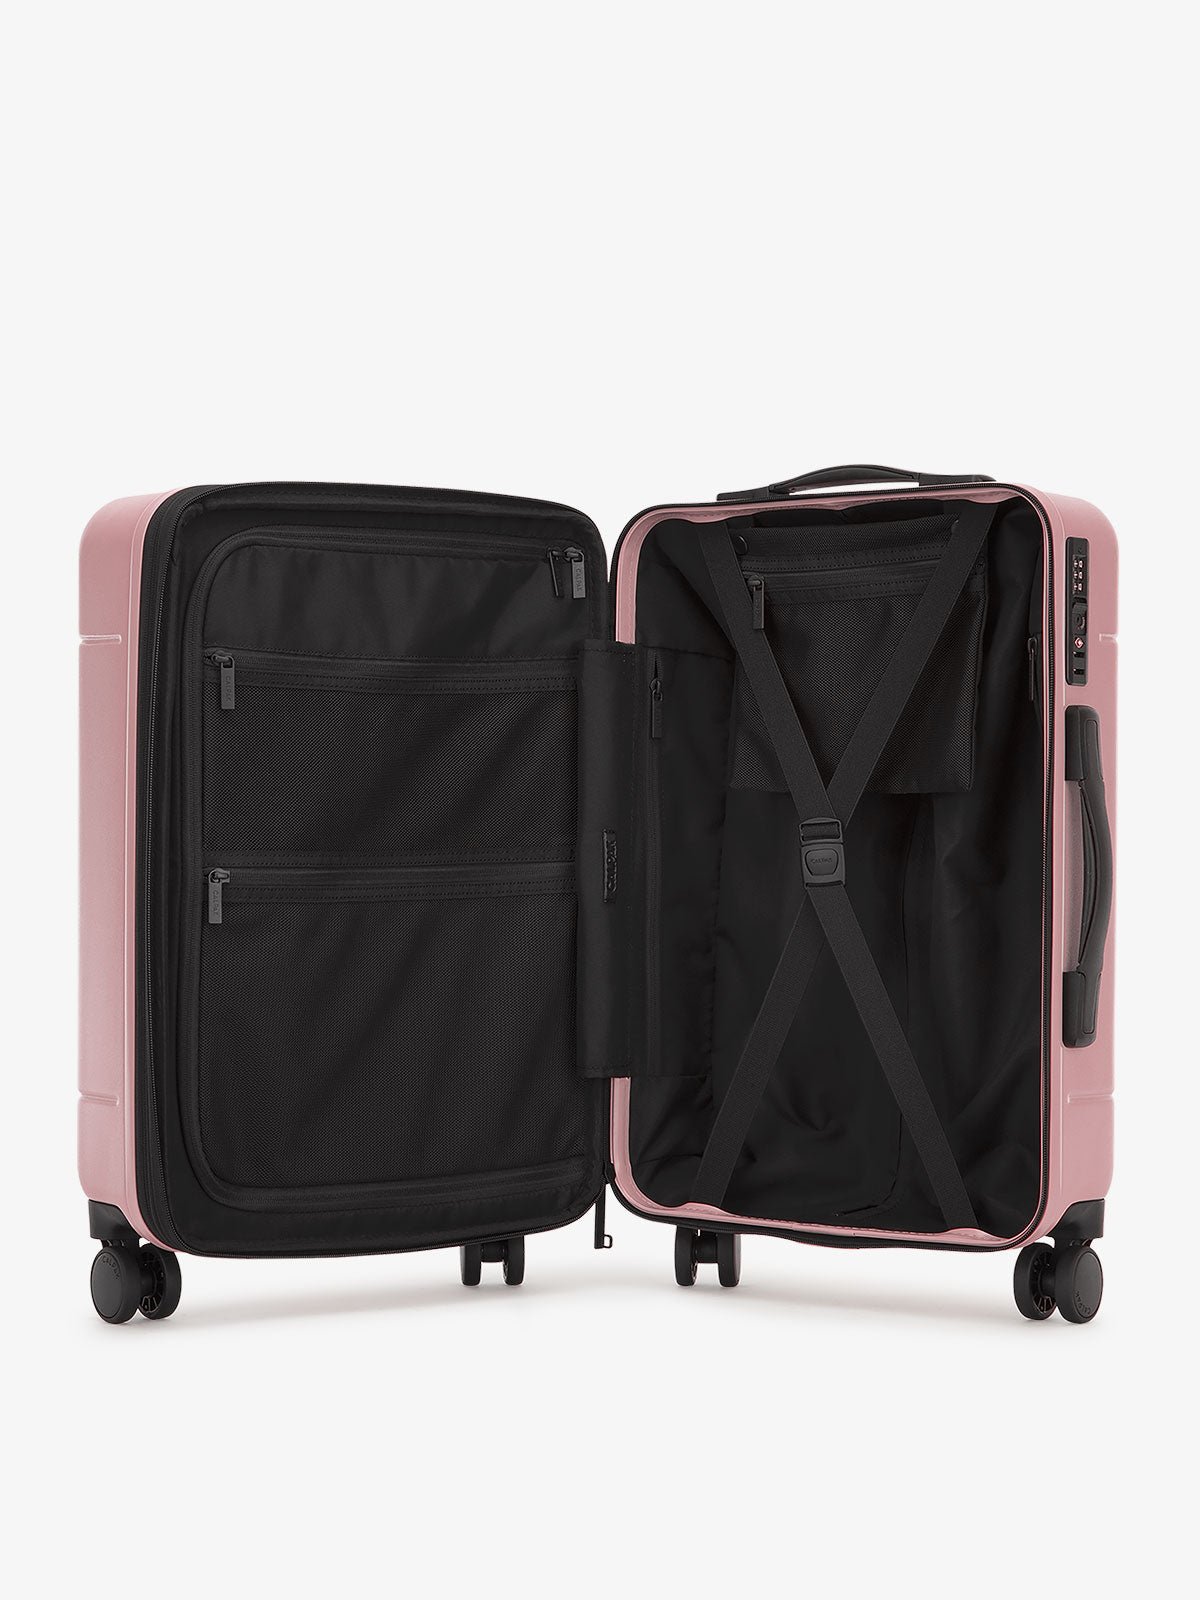 Interior of Hue rolling carry-on suitcase in pink mauve